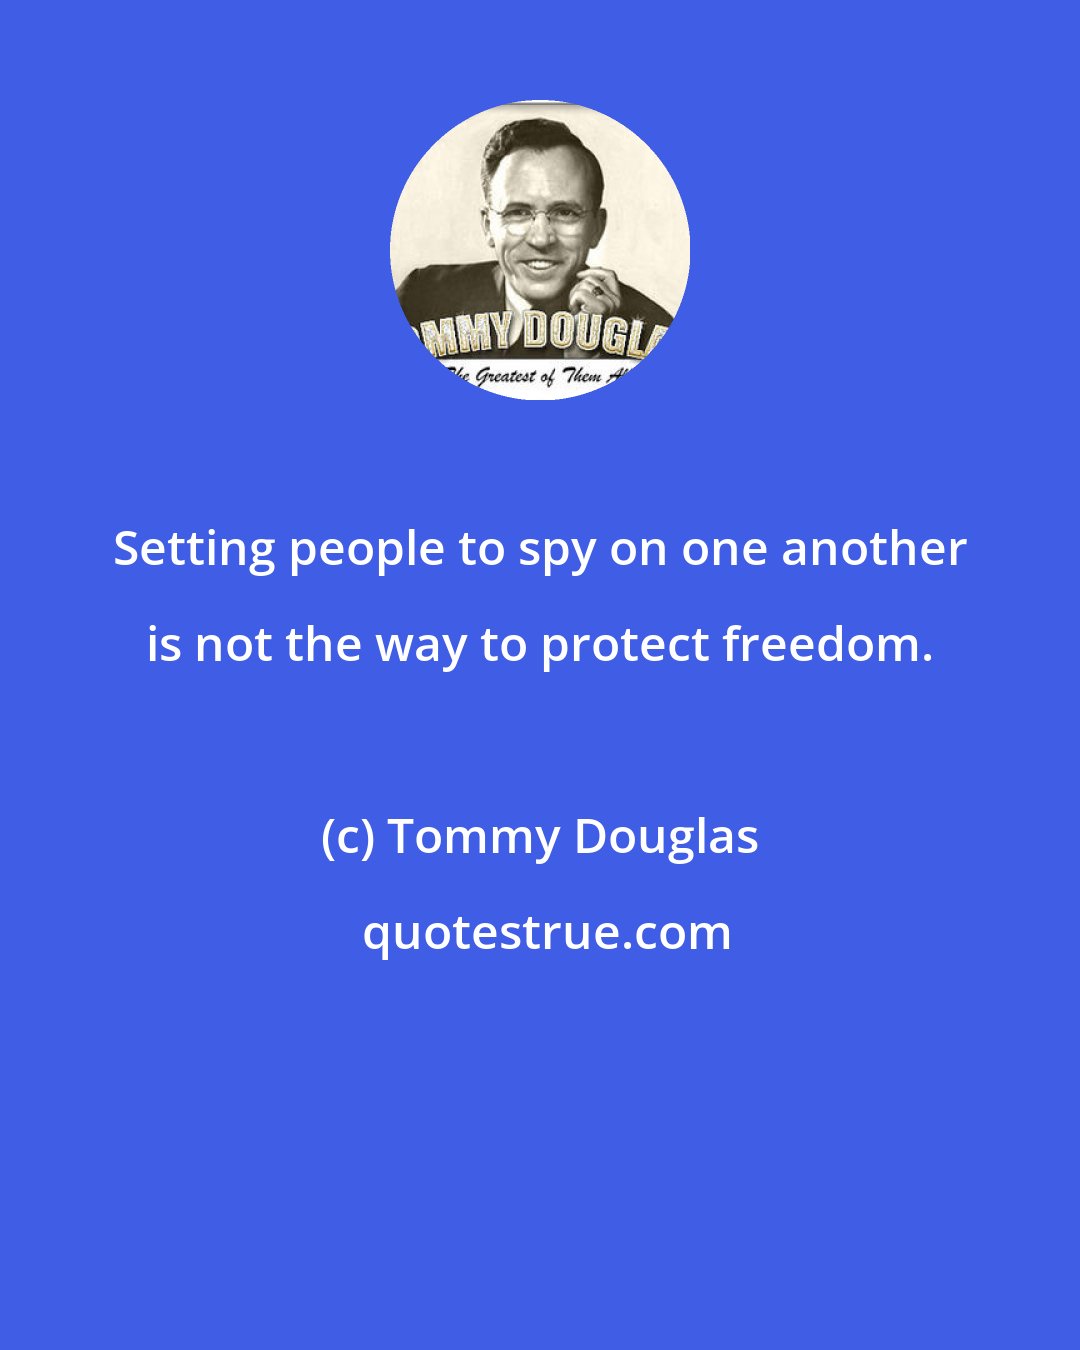 Tommy Douglas: Setting people to spy on one another is not the way to protect freedom.